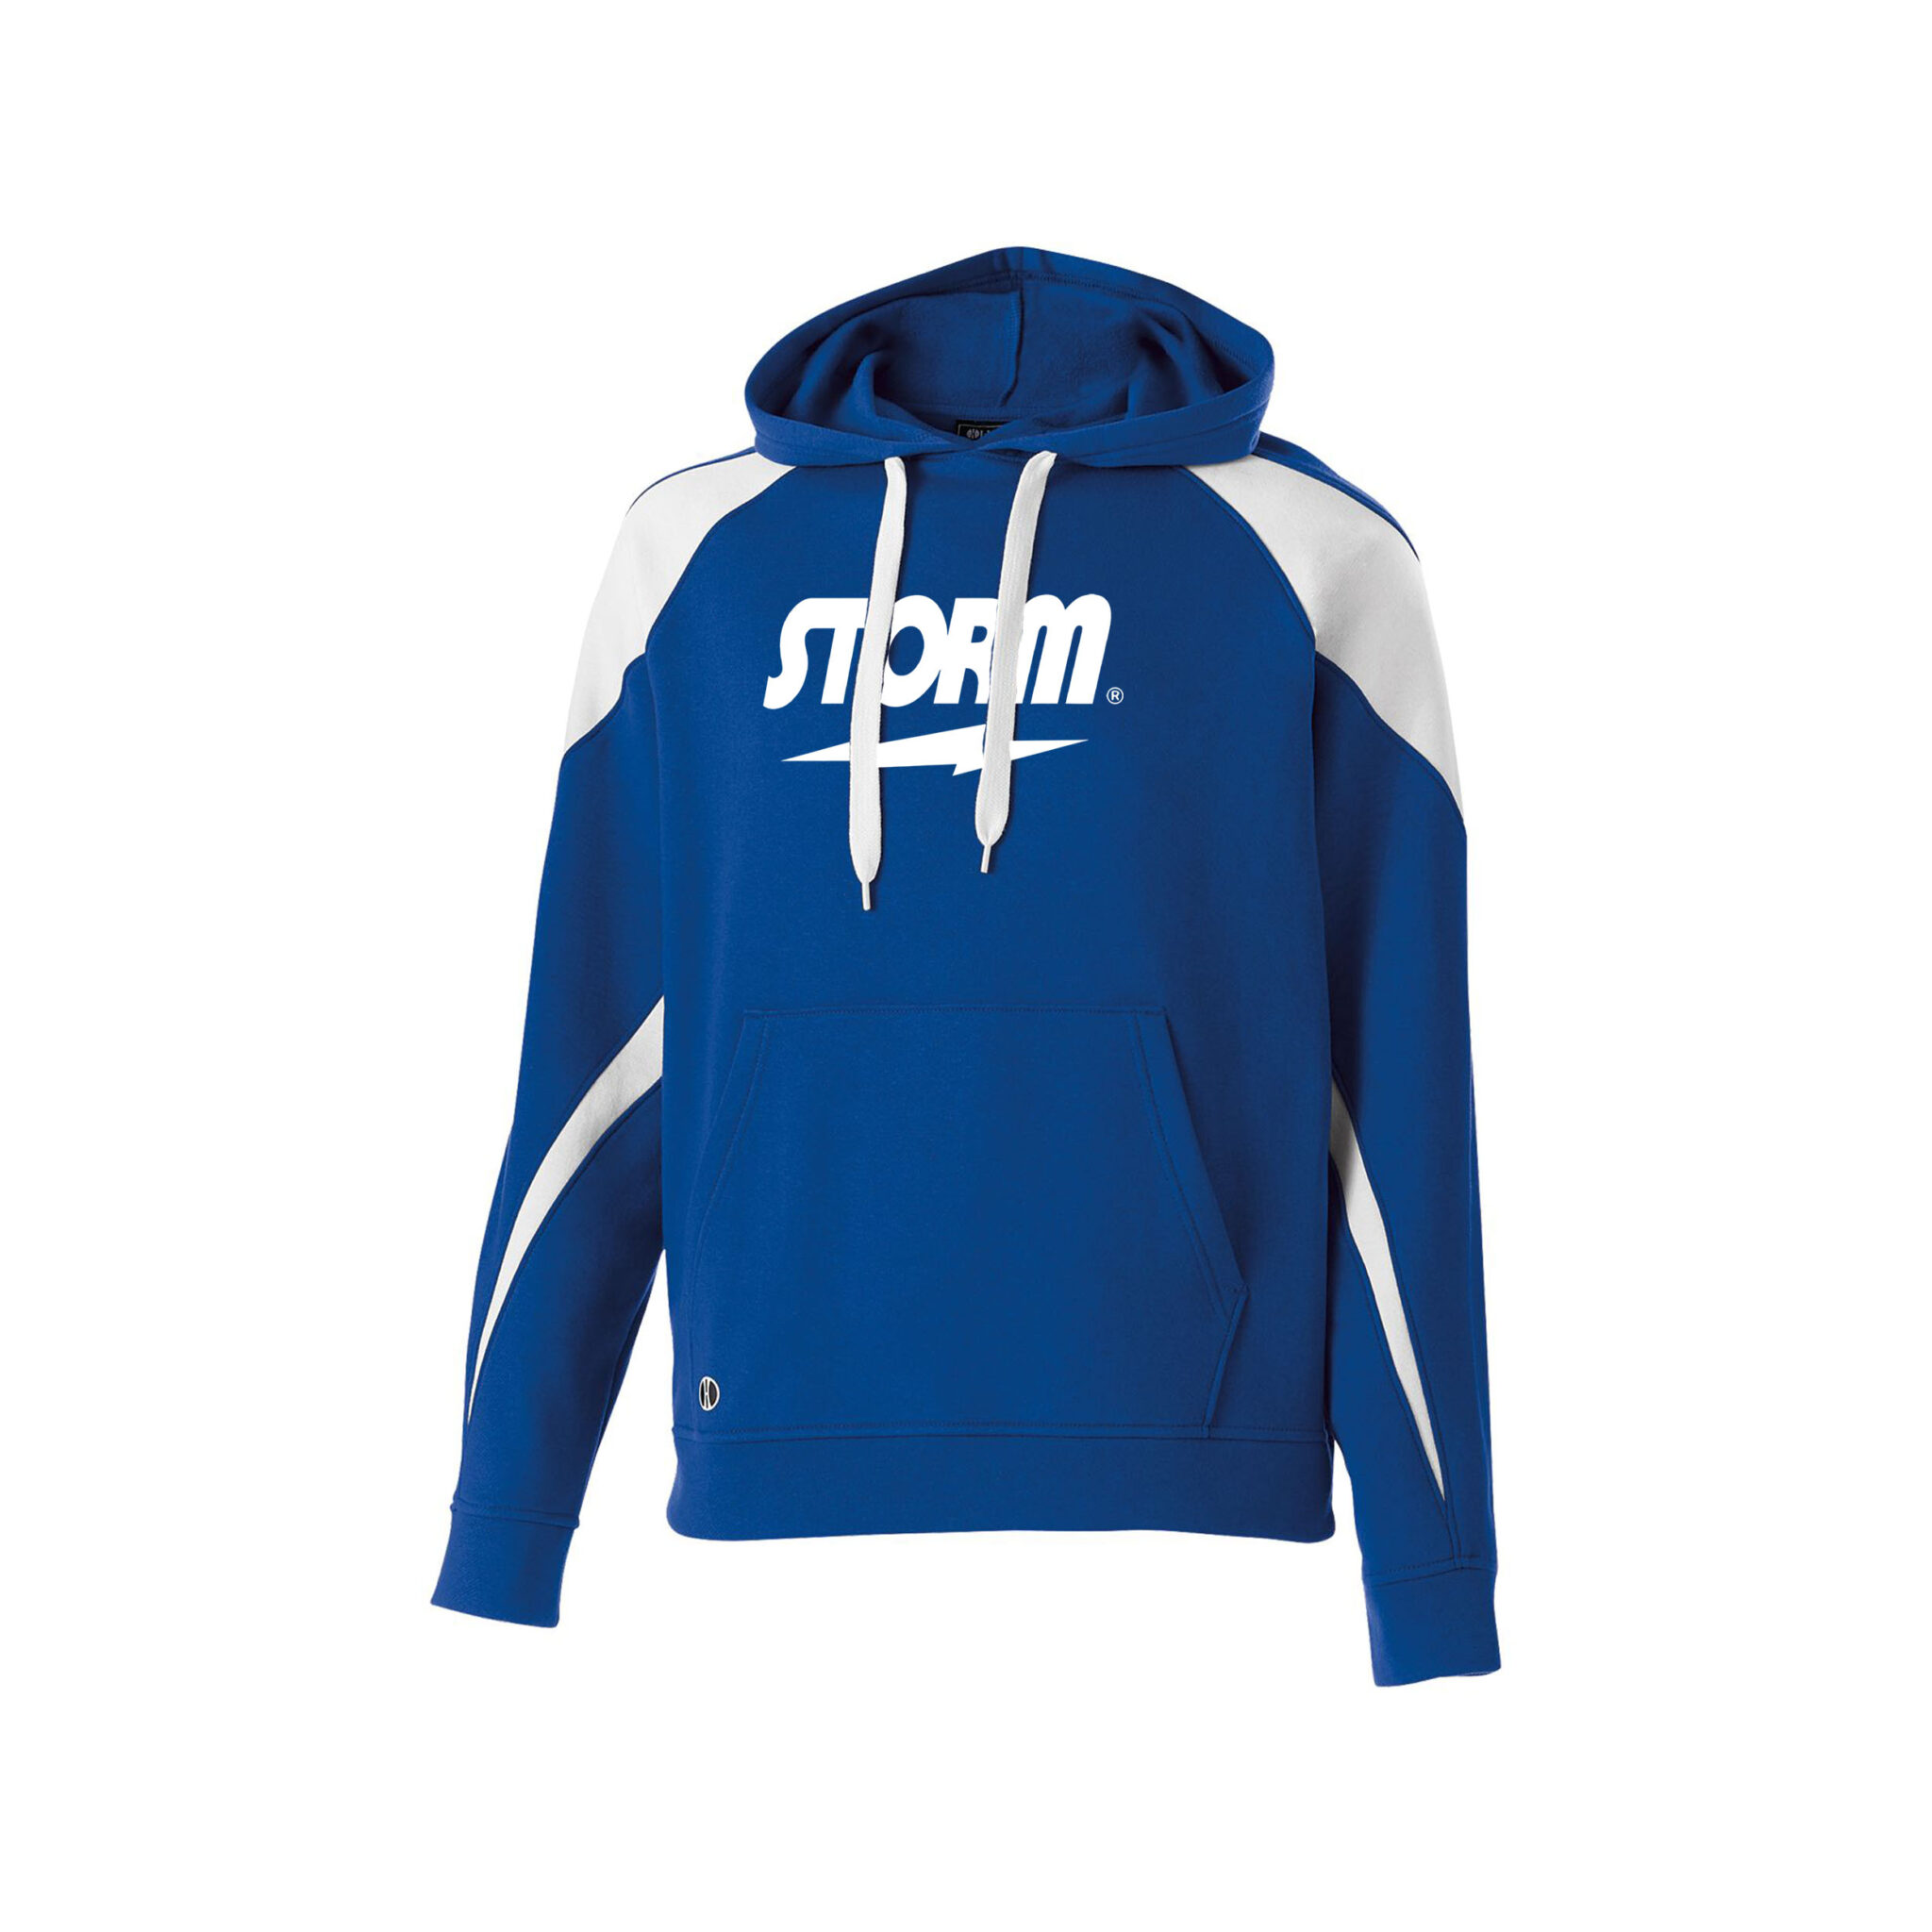 Image of All Storm Hoodies!